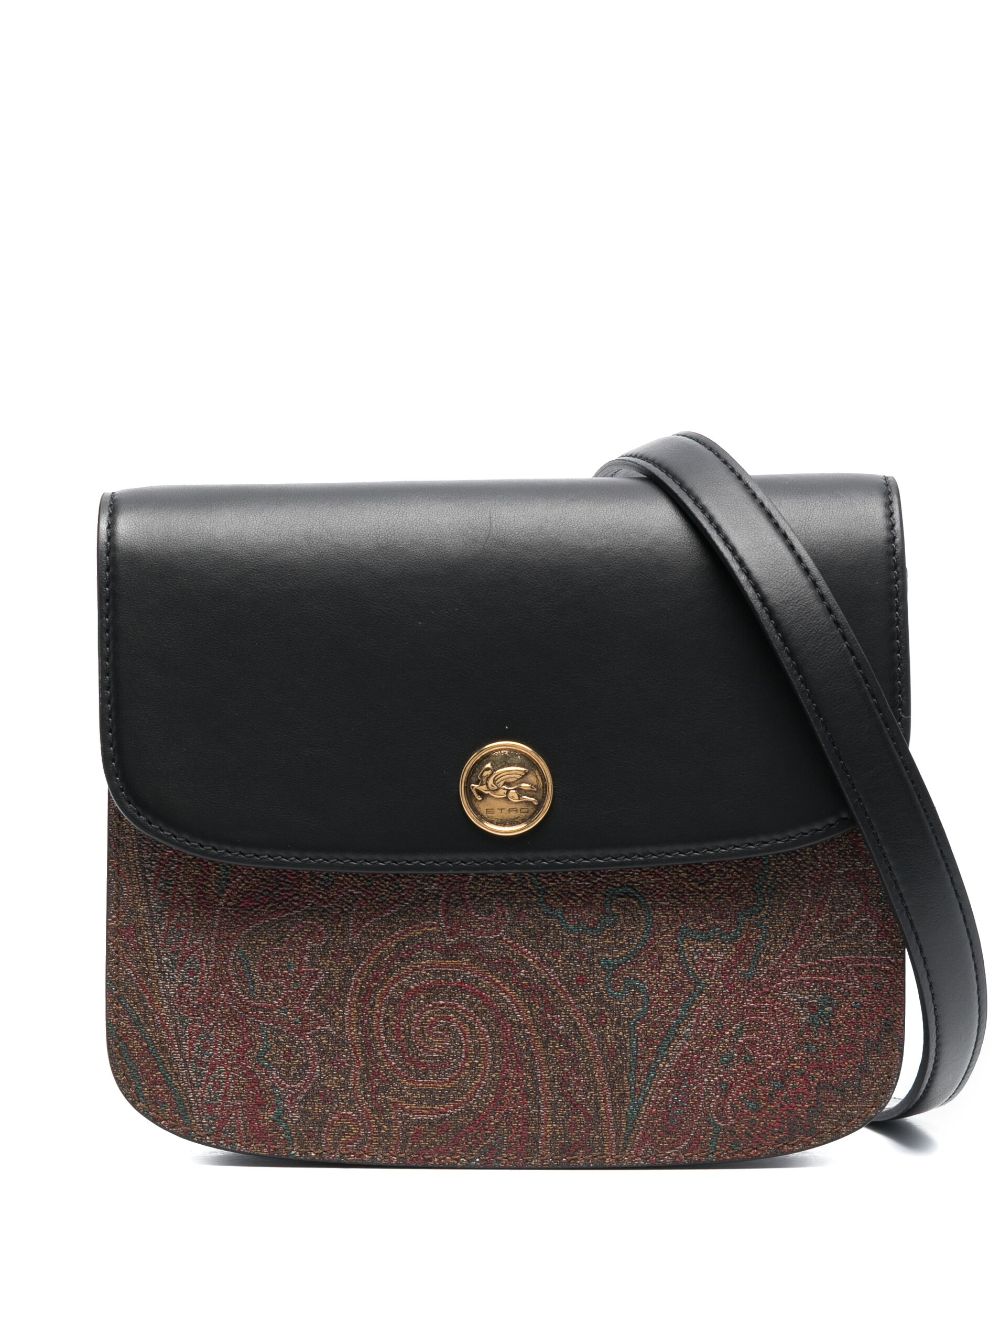 ETRO Essential Black Paisley Leather Mini Crossbody Bag with Pegasus Motif and Gold-Tone Accents